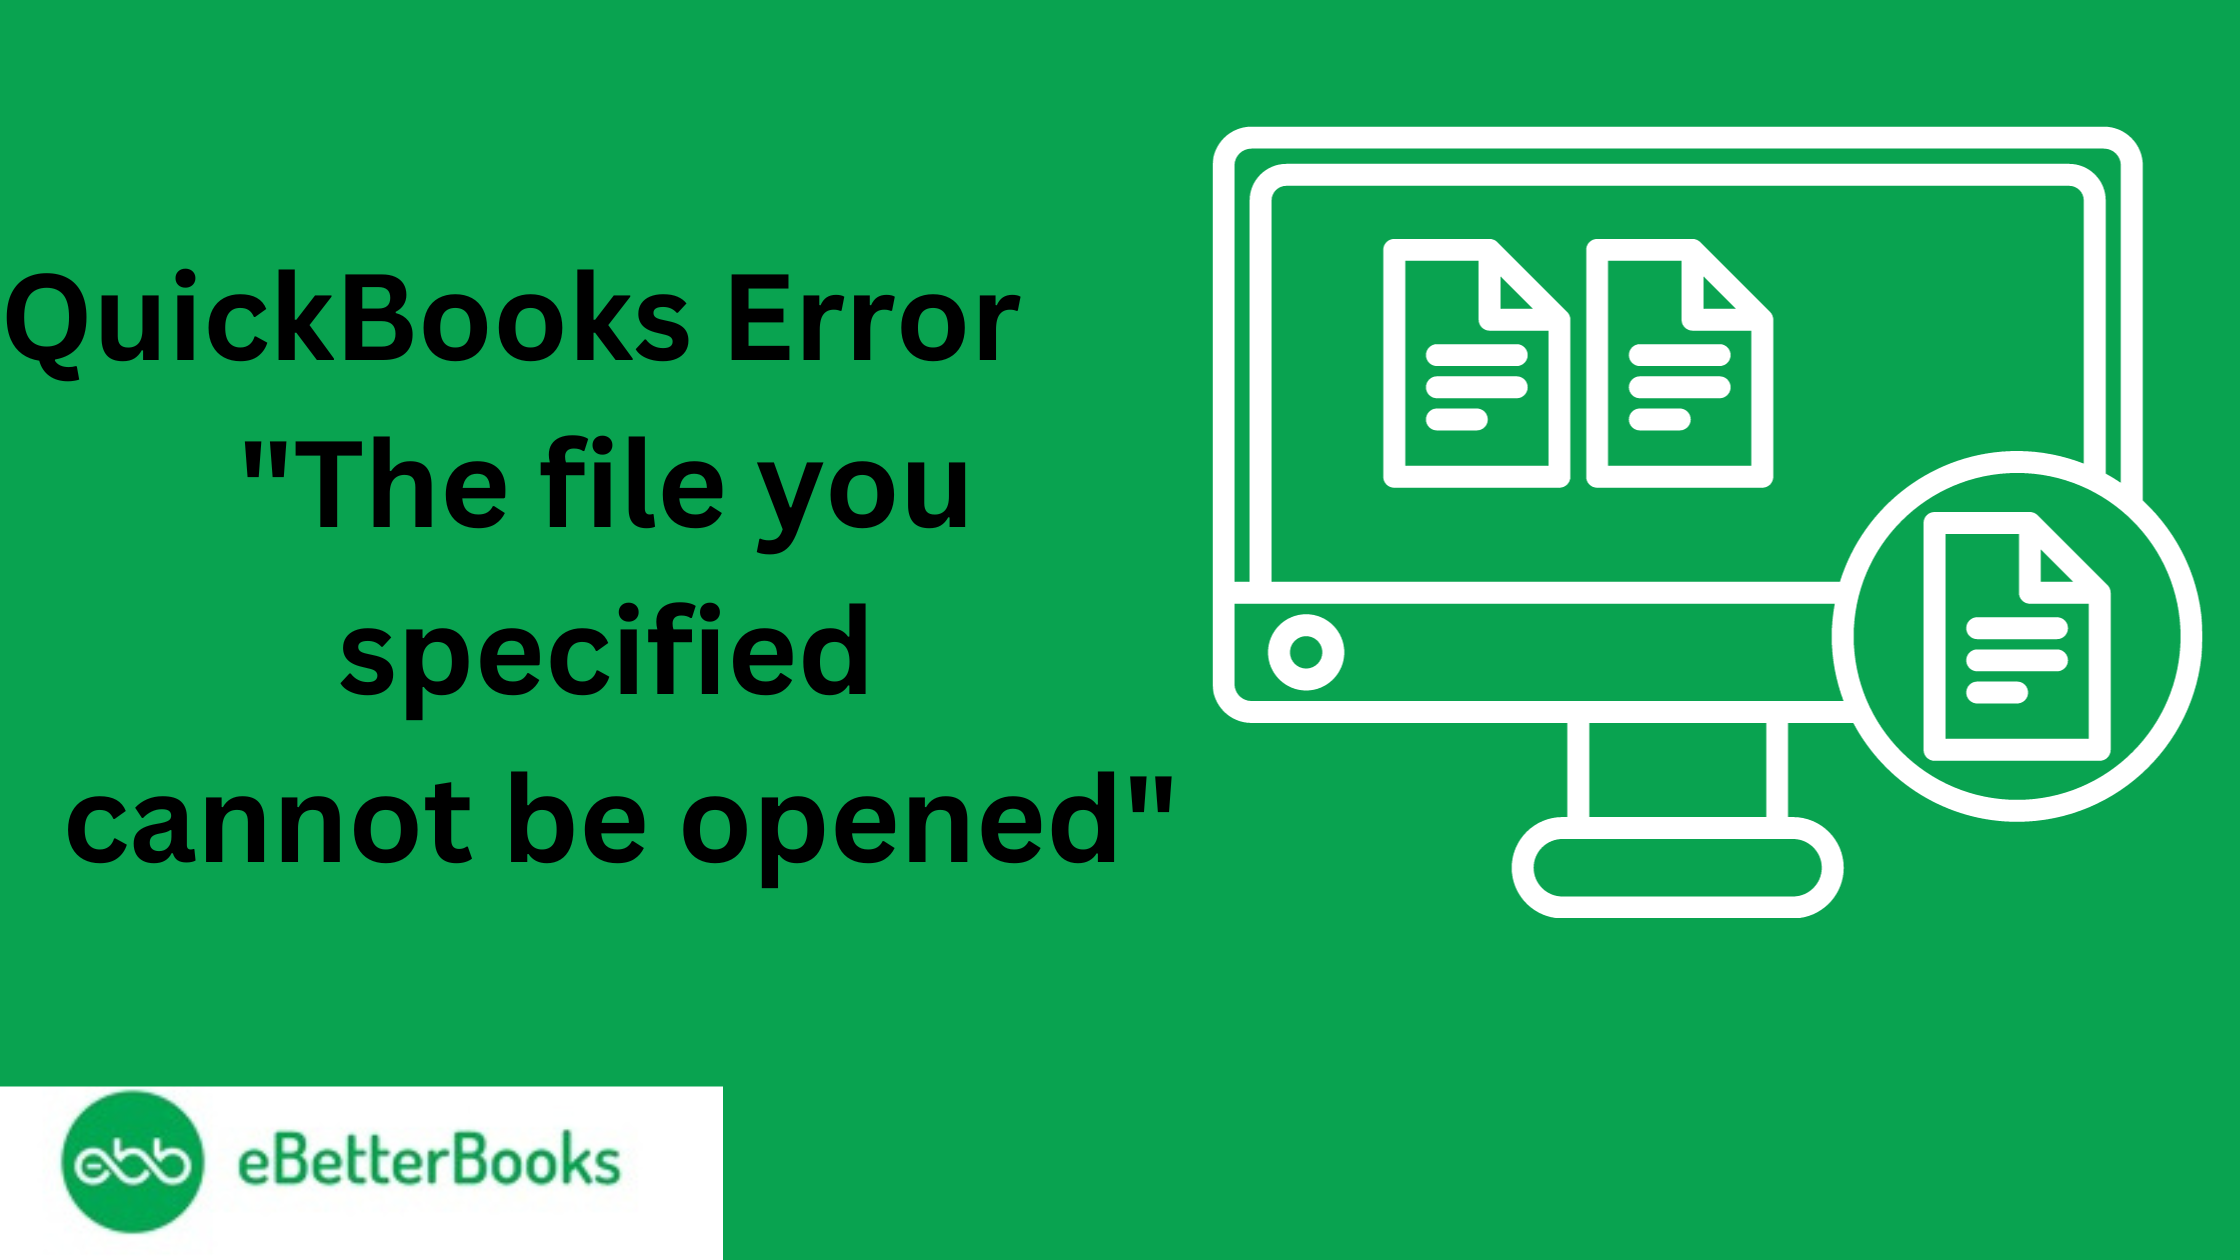 The file you specified cannot be opened QB error